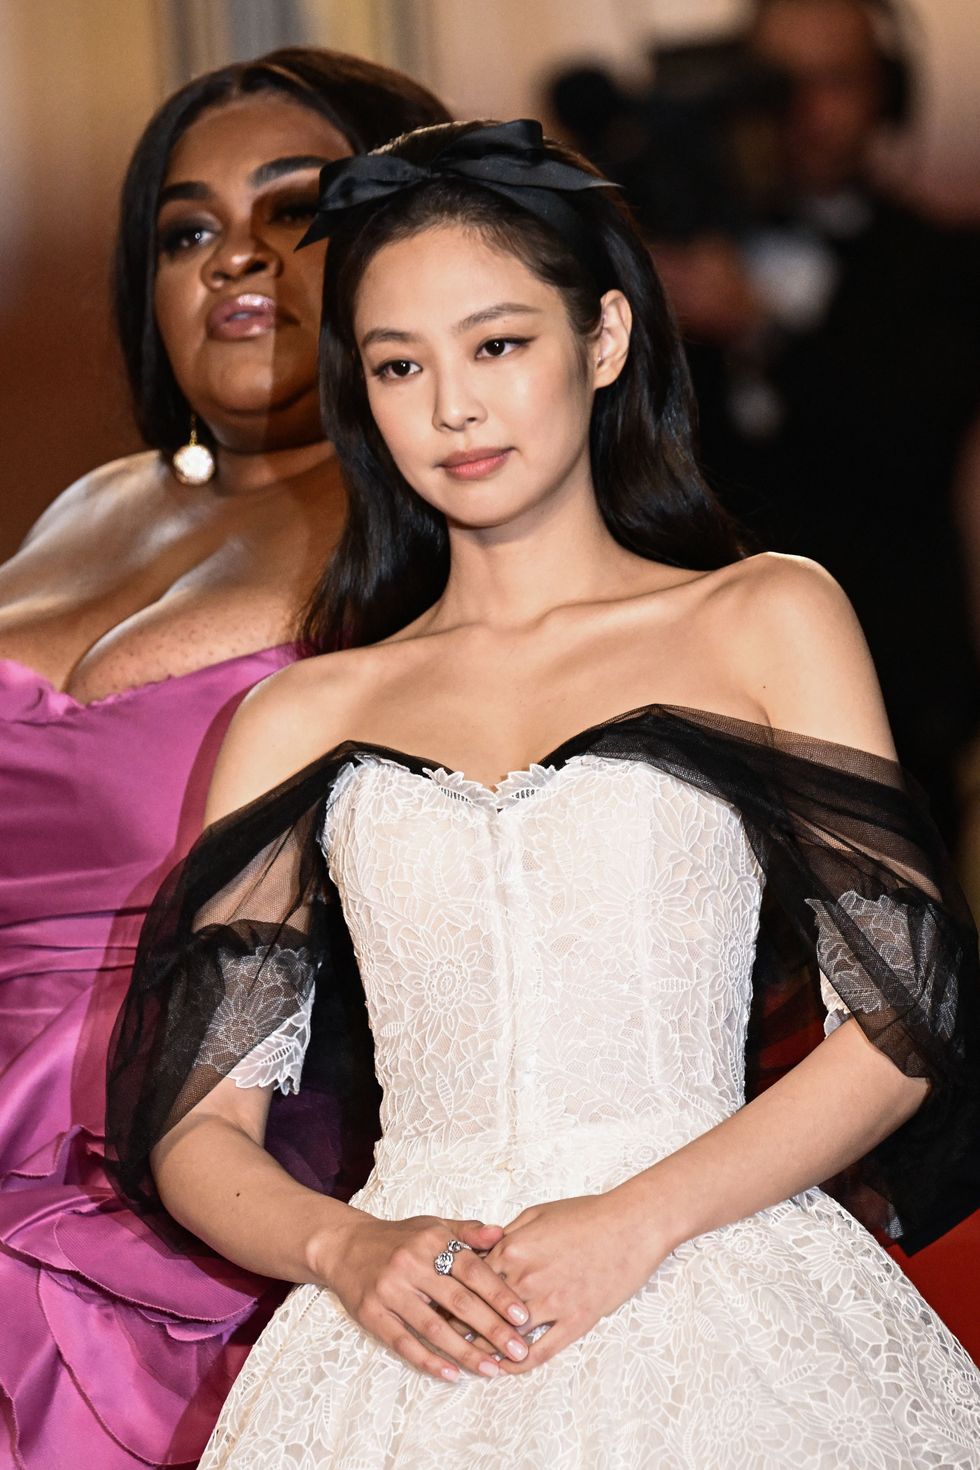 Jennie (Blackpink) and Lily-rose depp bring chanel legacy to Cannes film festival red carpet